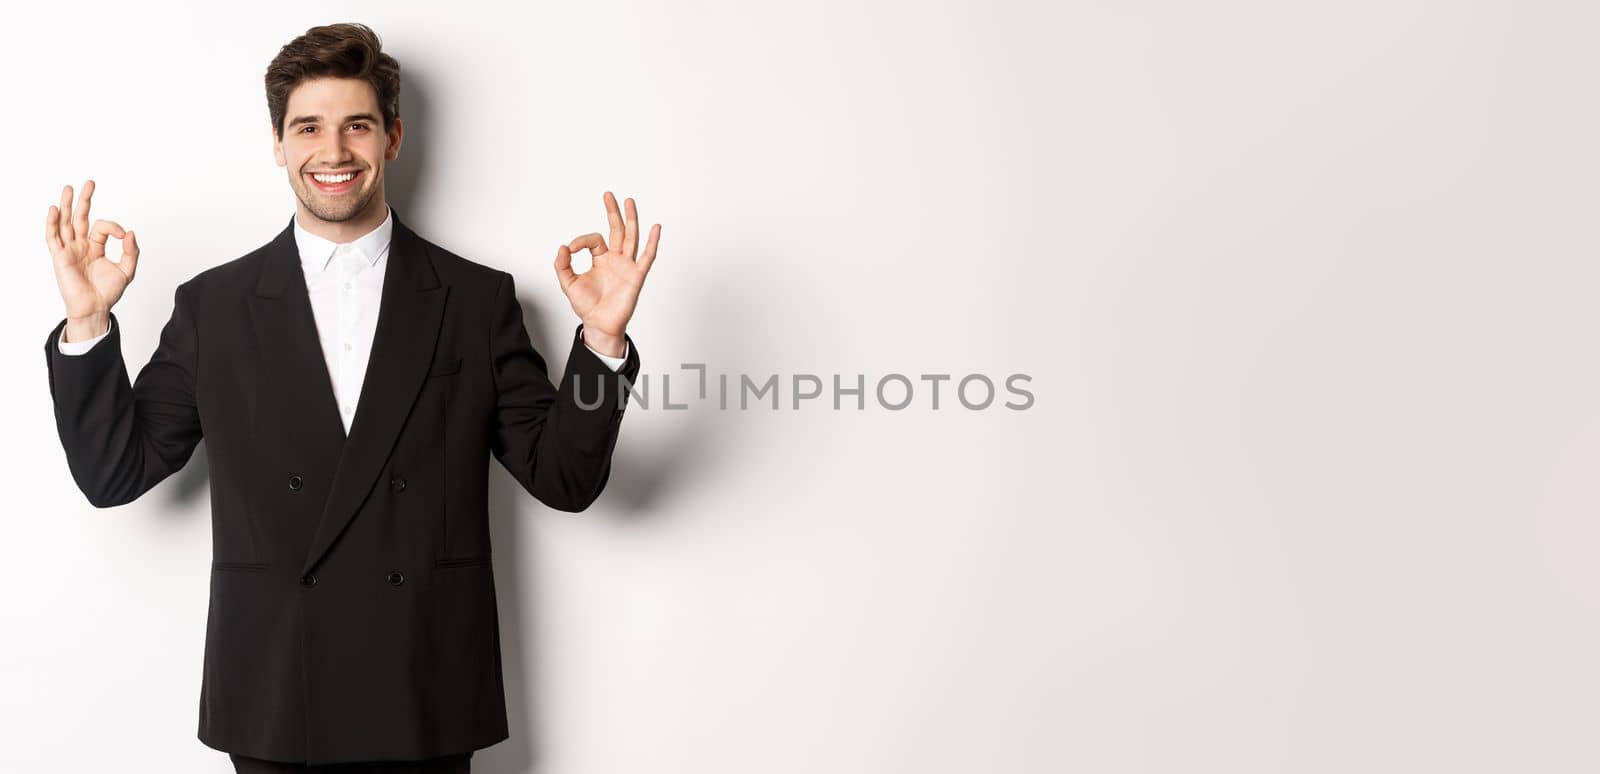 Concept of new year party, celebration and lifestyle. Portrait of handsome attractive man in black suit, smiling and showing okay signs, approve and recommend something, white background.